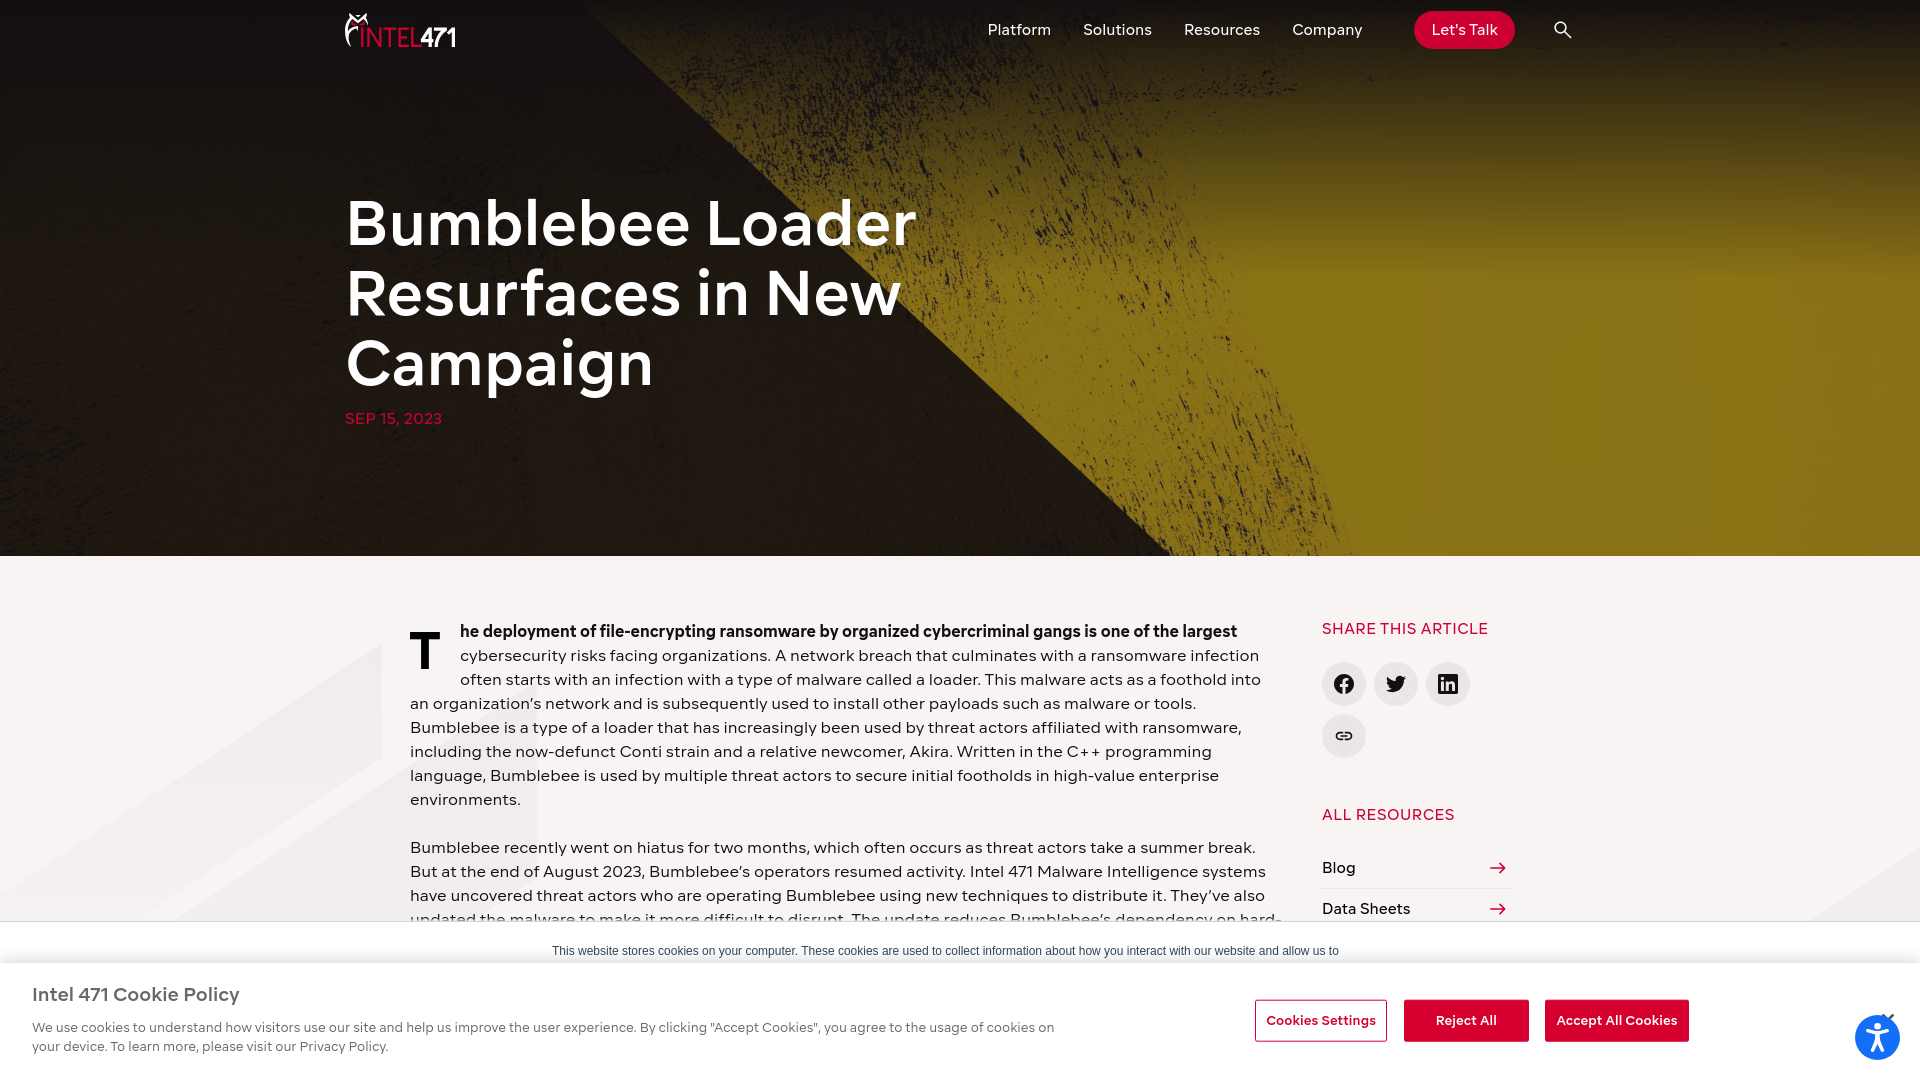 Bumblebee Loader Resurfaces in New Campaign | Intel471